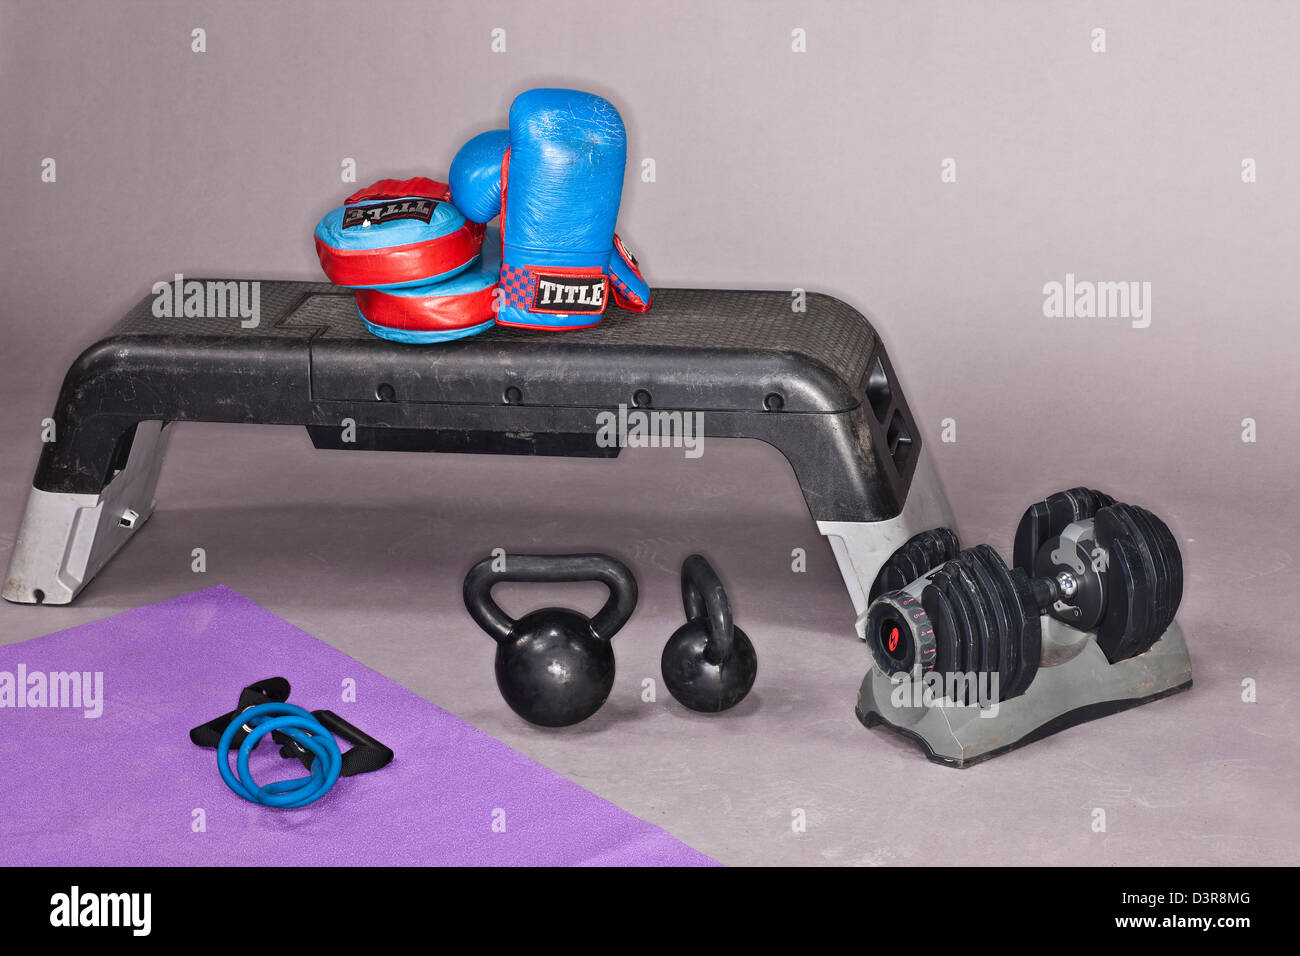 Home workout fitness equipment Stock Photo